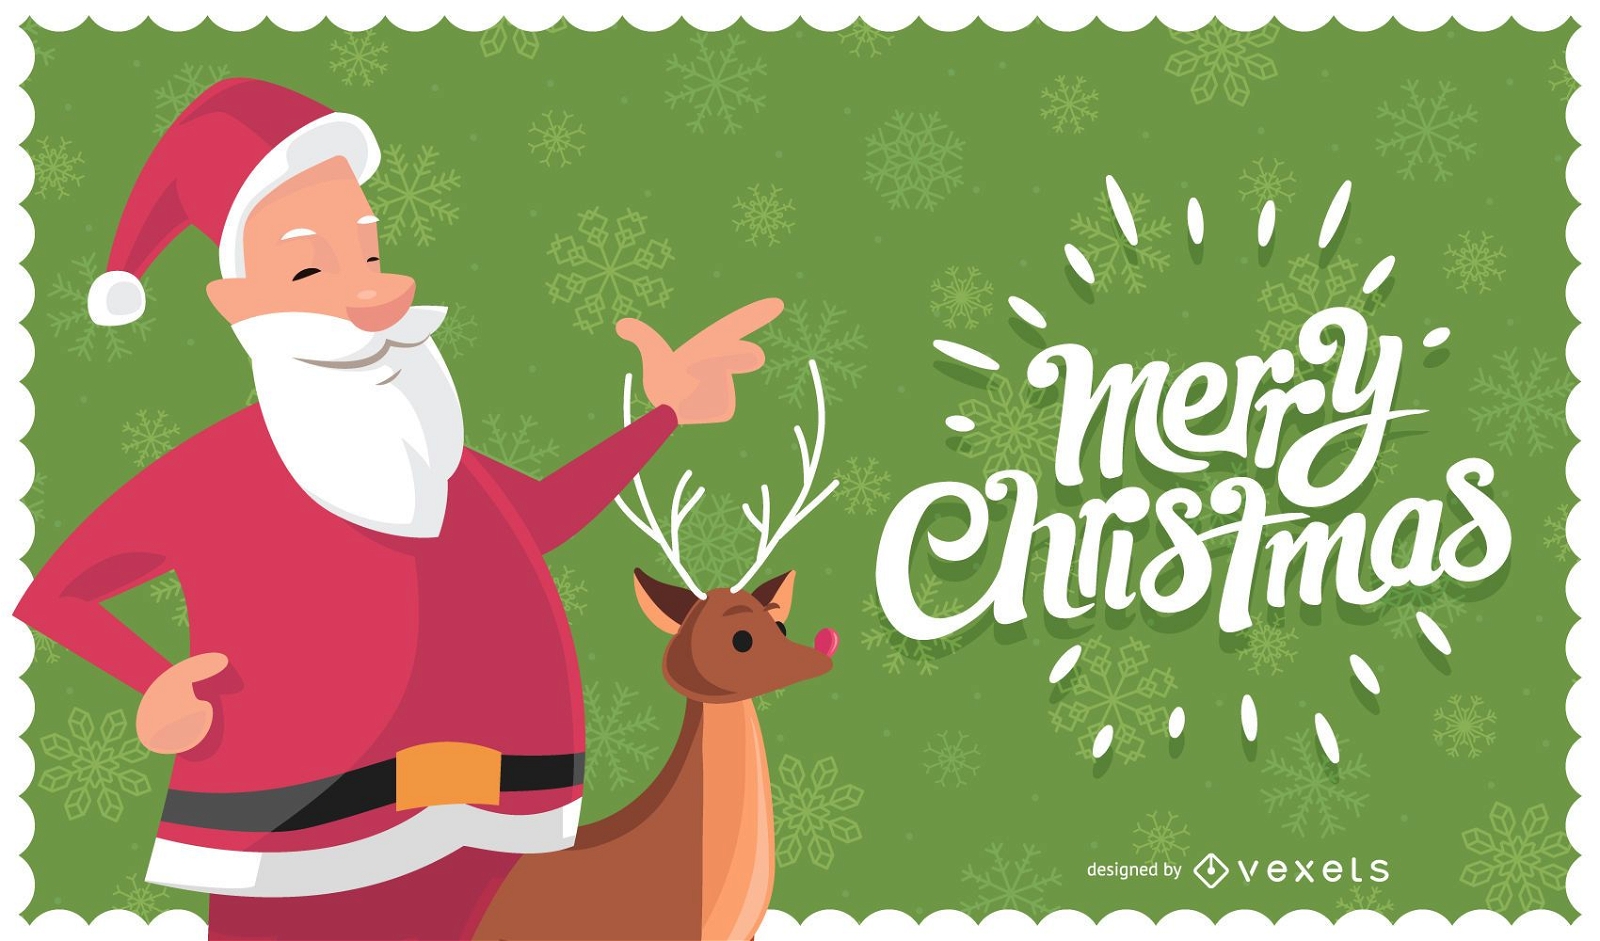 Christmas card with Santa Claus and reindeer